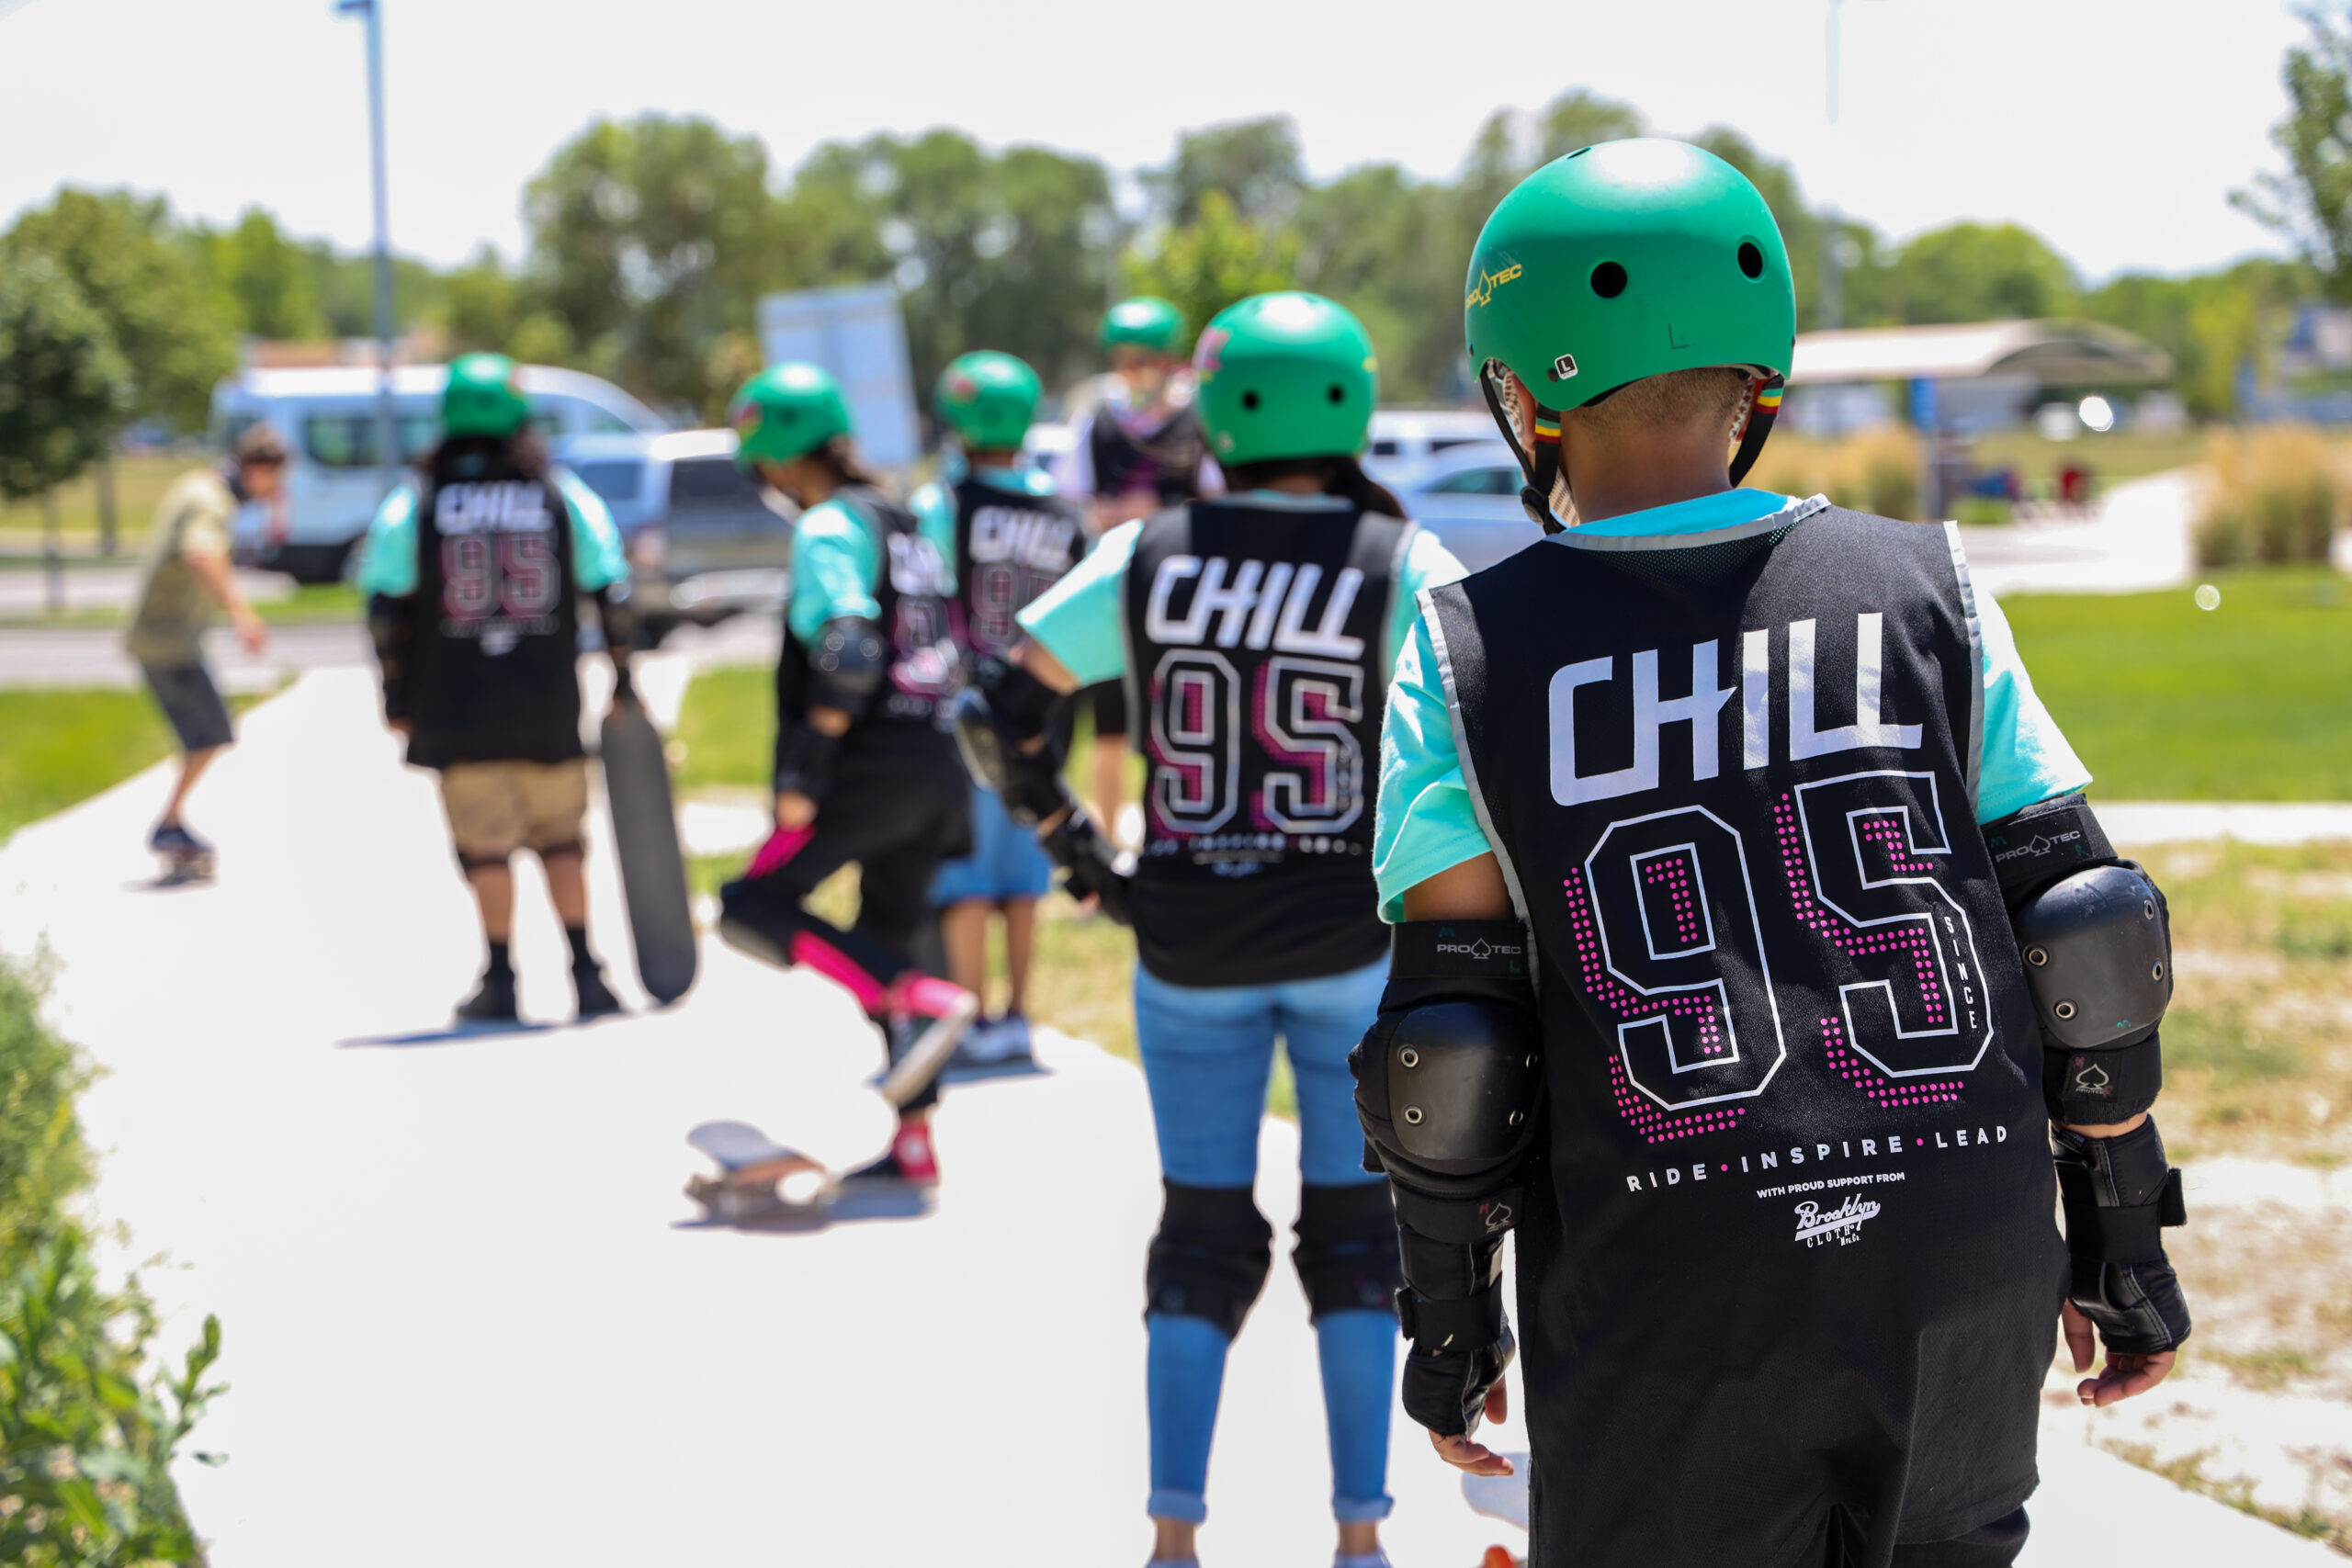 A group of Chill youth standing in a row on a path at the skatepark.